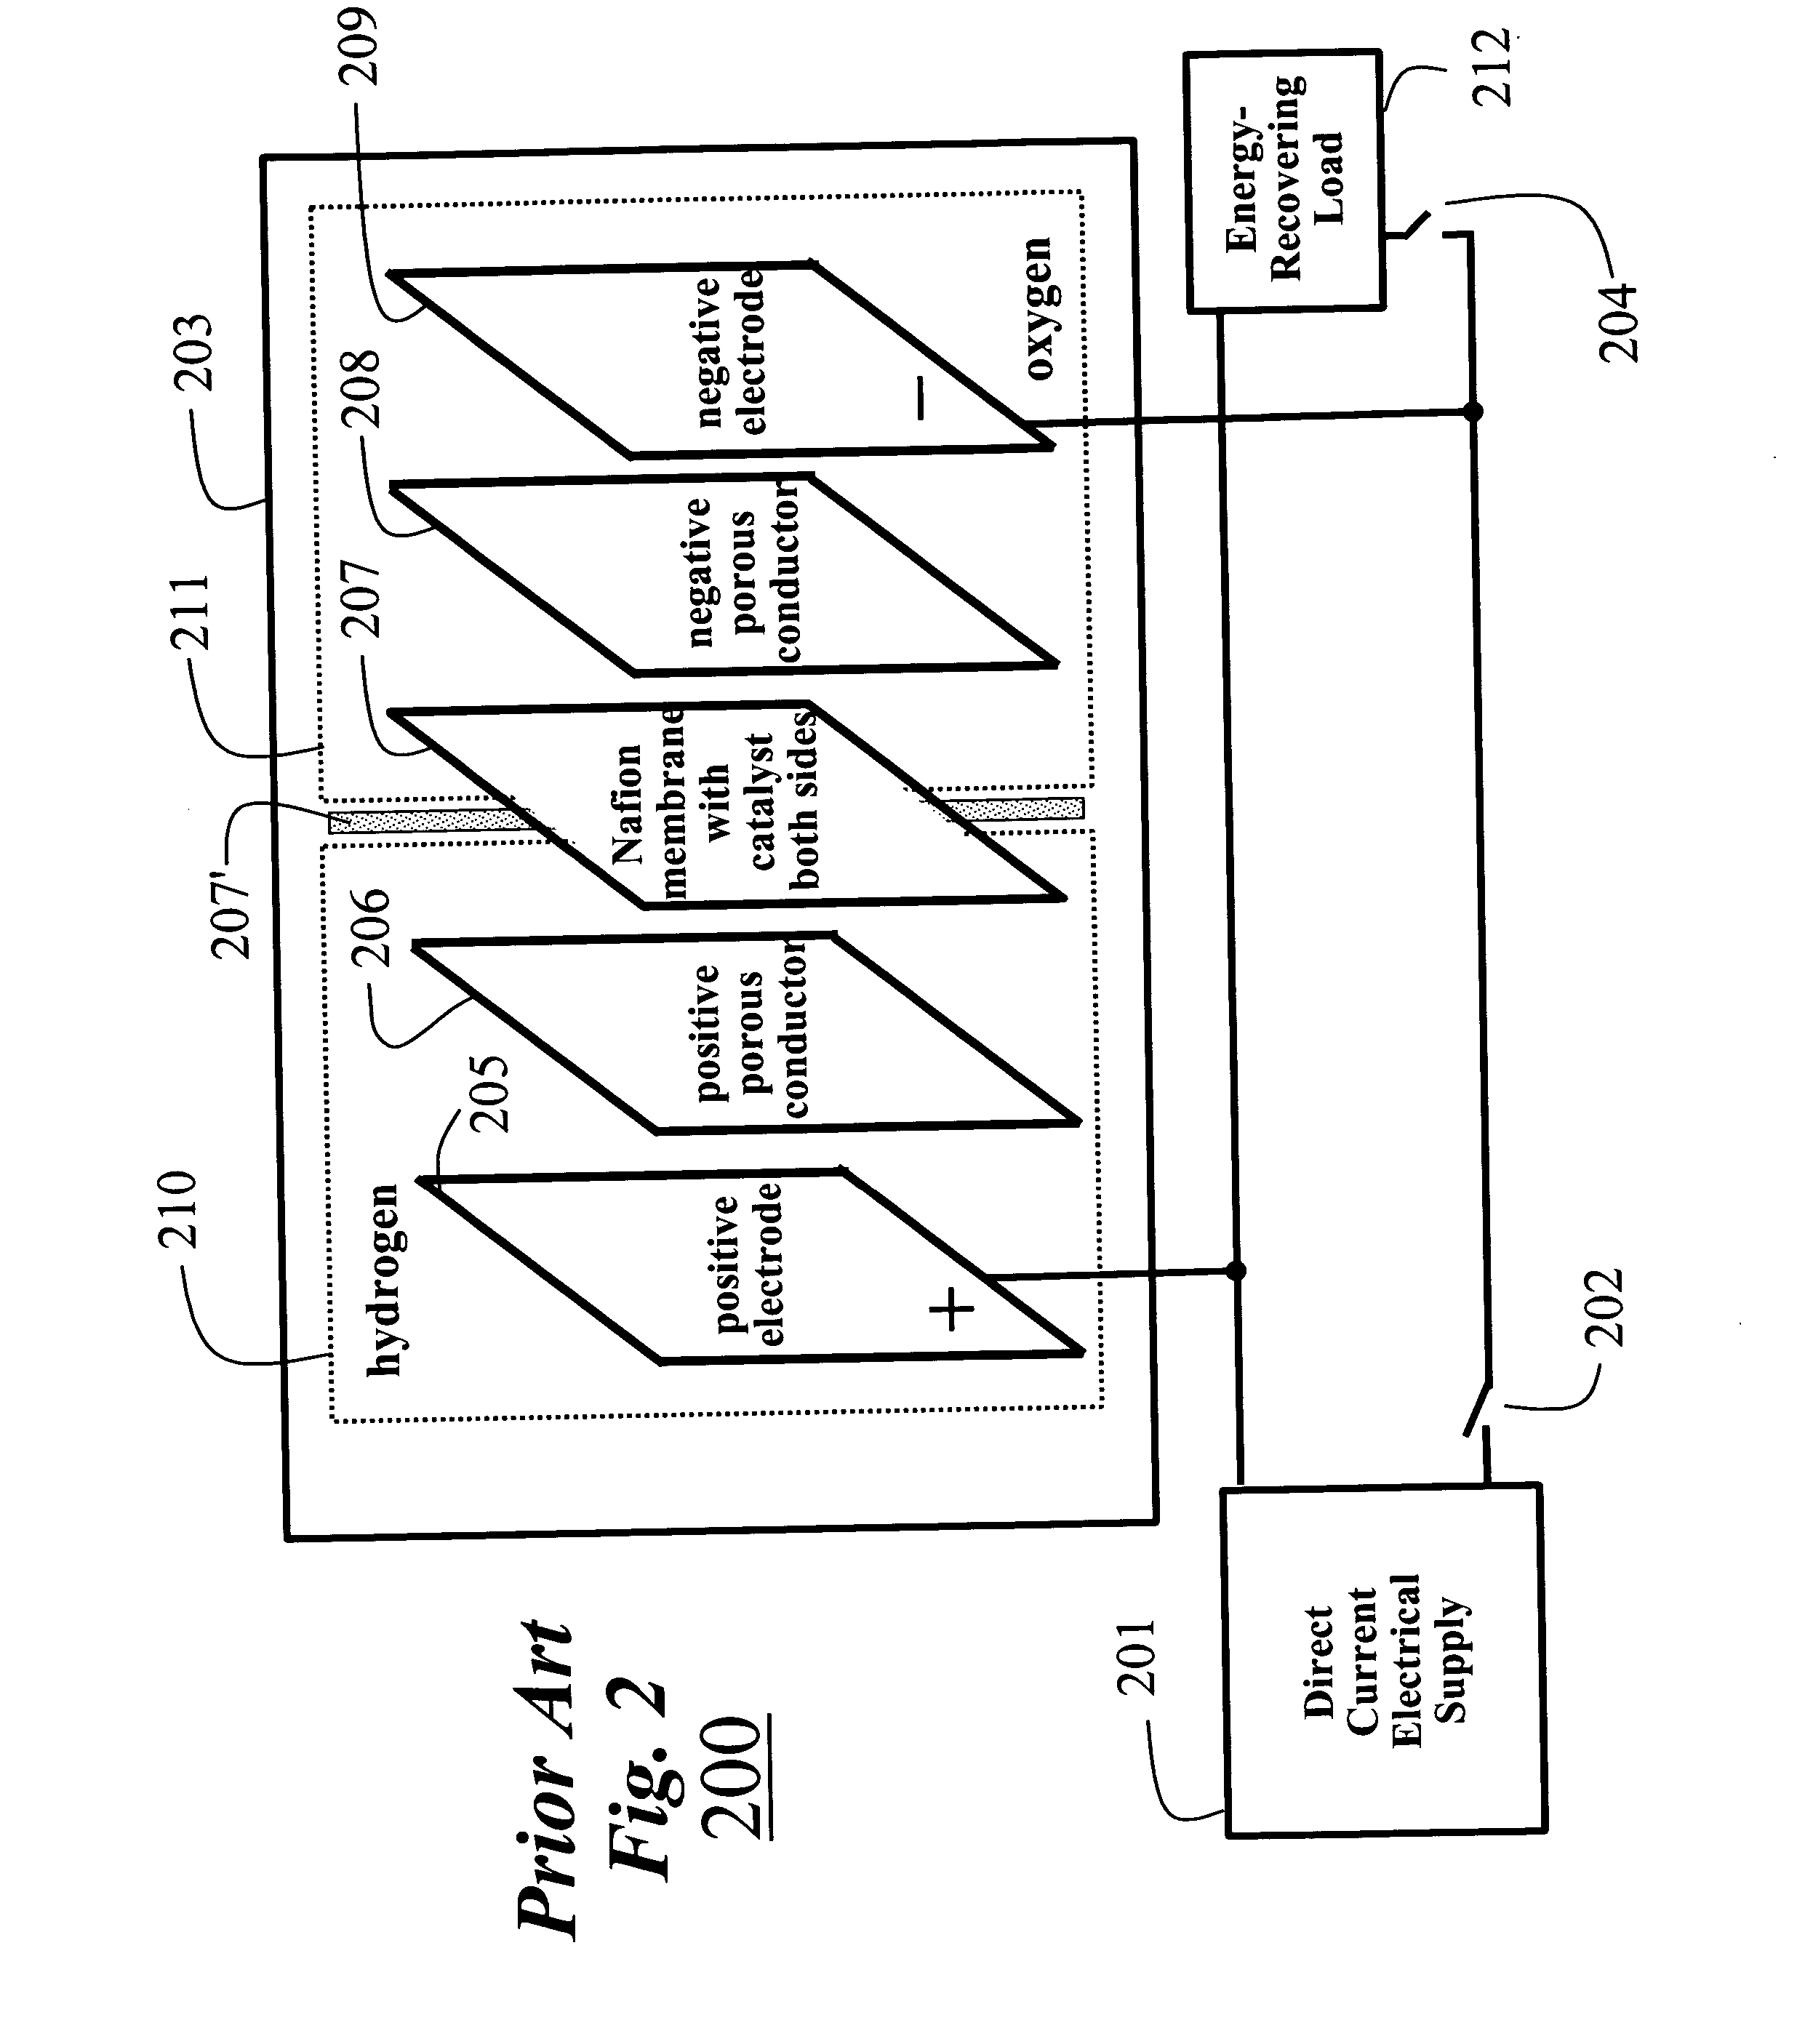 Fuel-cell actuated mechanical device